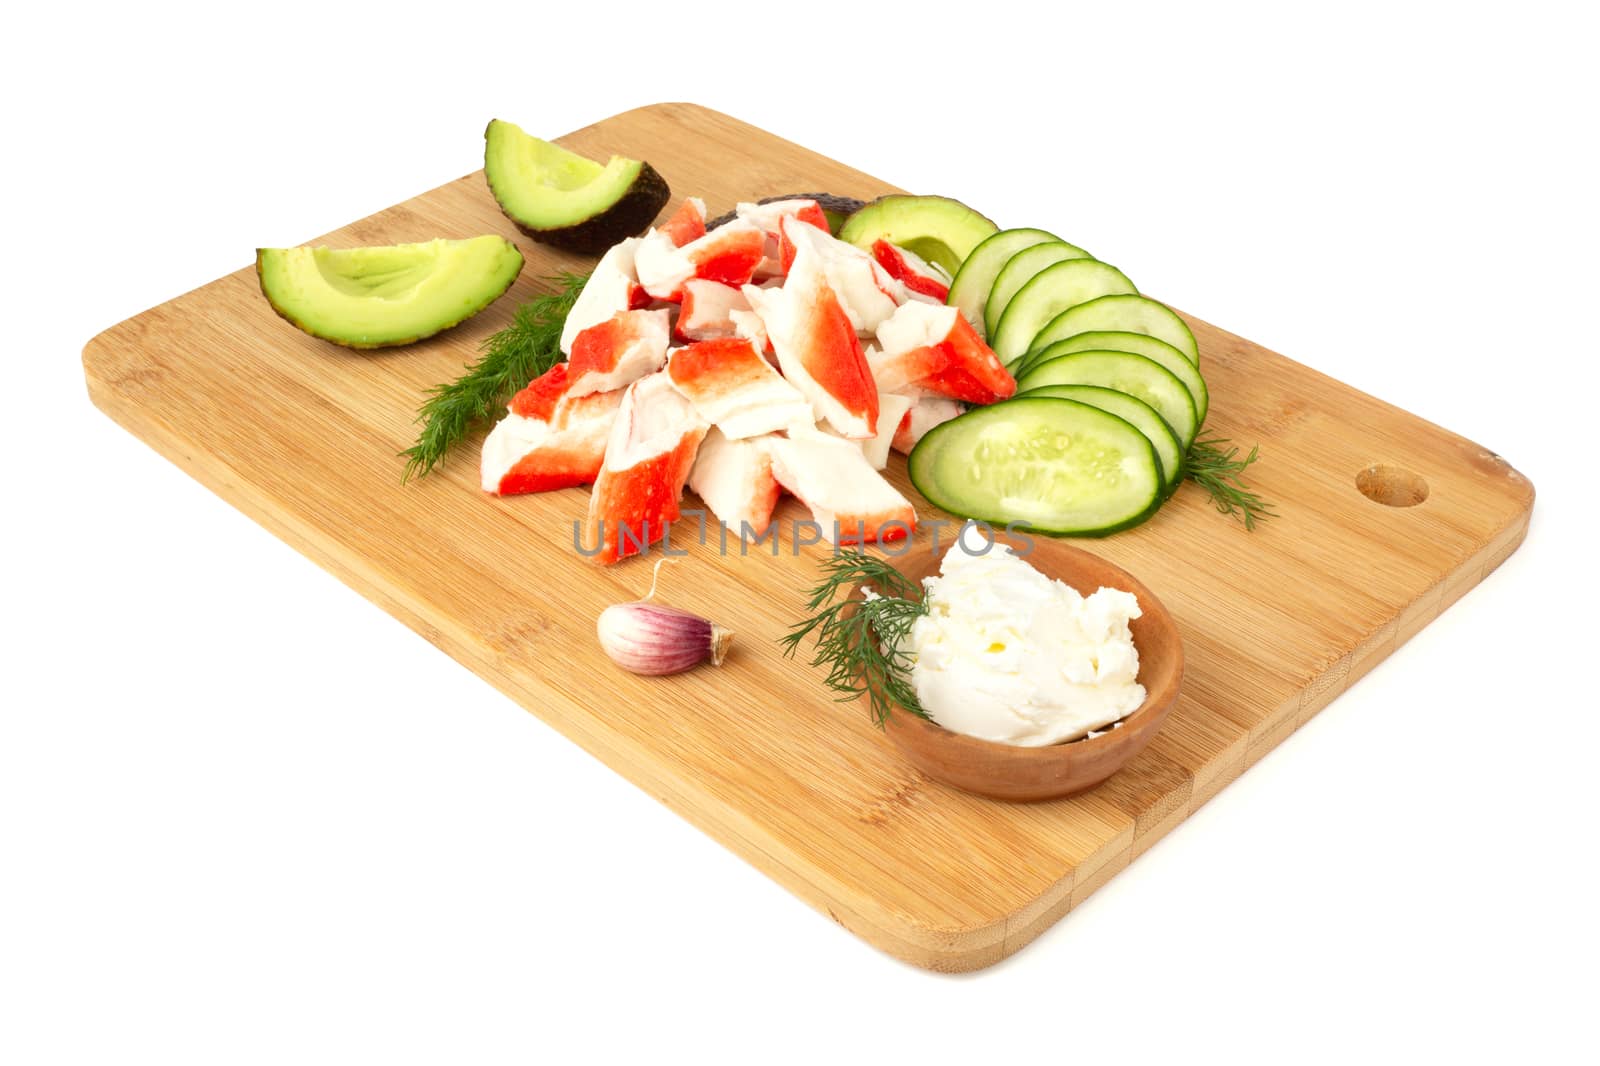 Crab sticks cut meat and vegetables avocado cut cucumbers on wooden cutting board isolated on white background